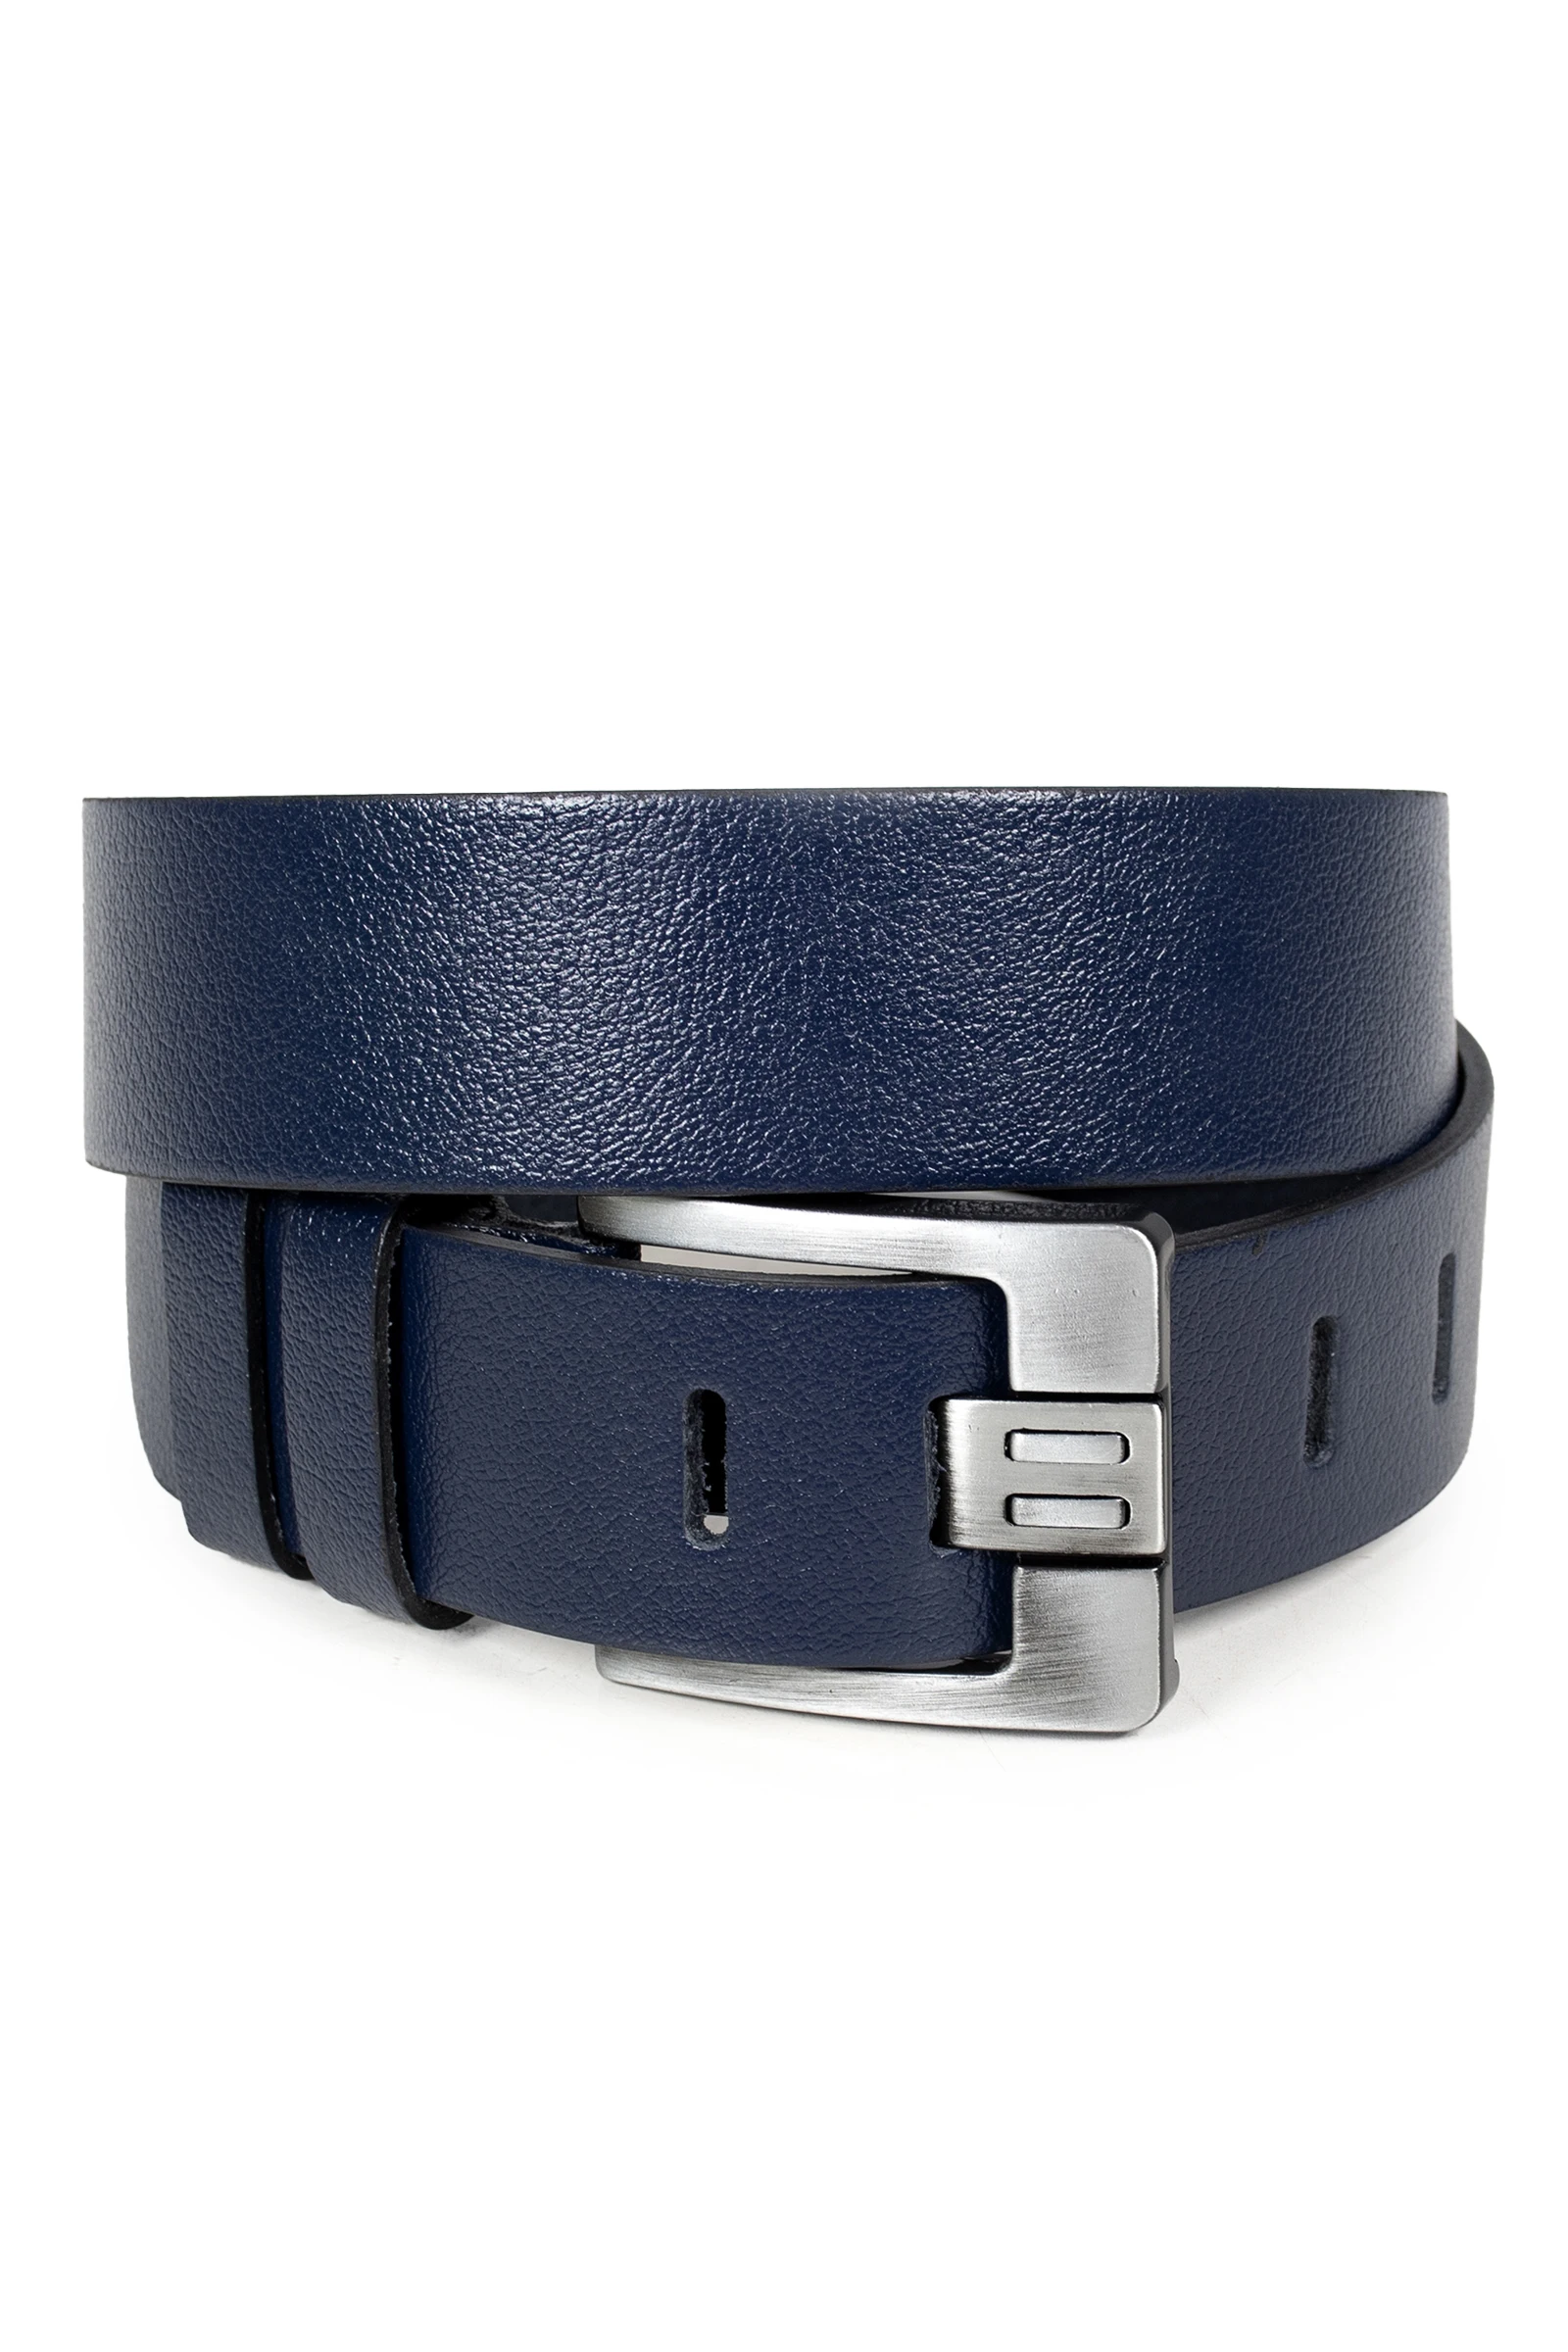 DeepSEA Thick Lingual and Buckled Men Sports Leather Male Belt 1801312